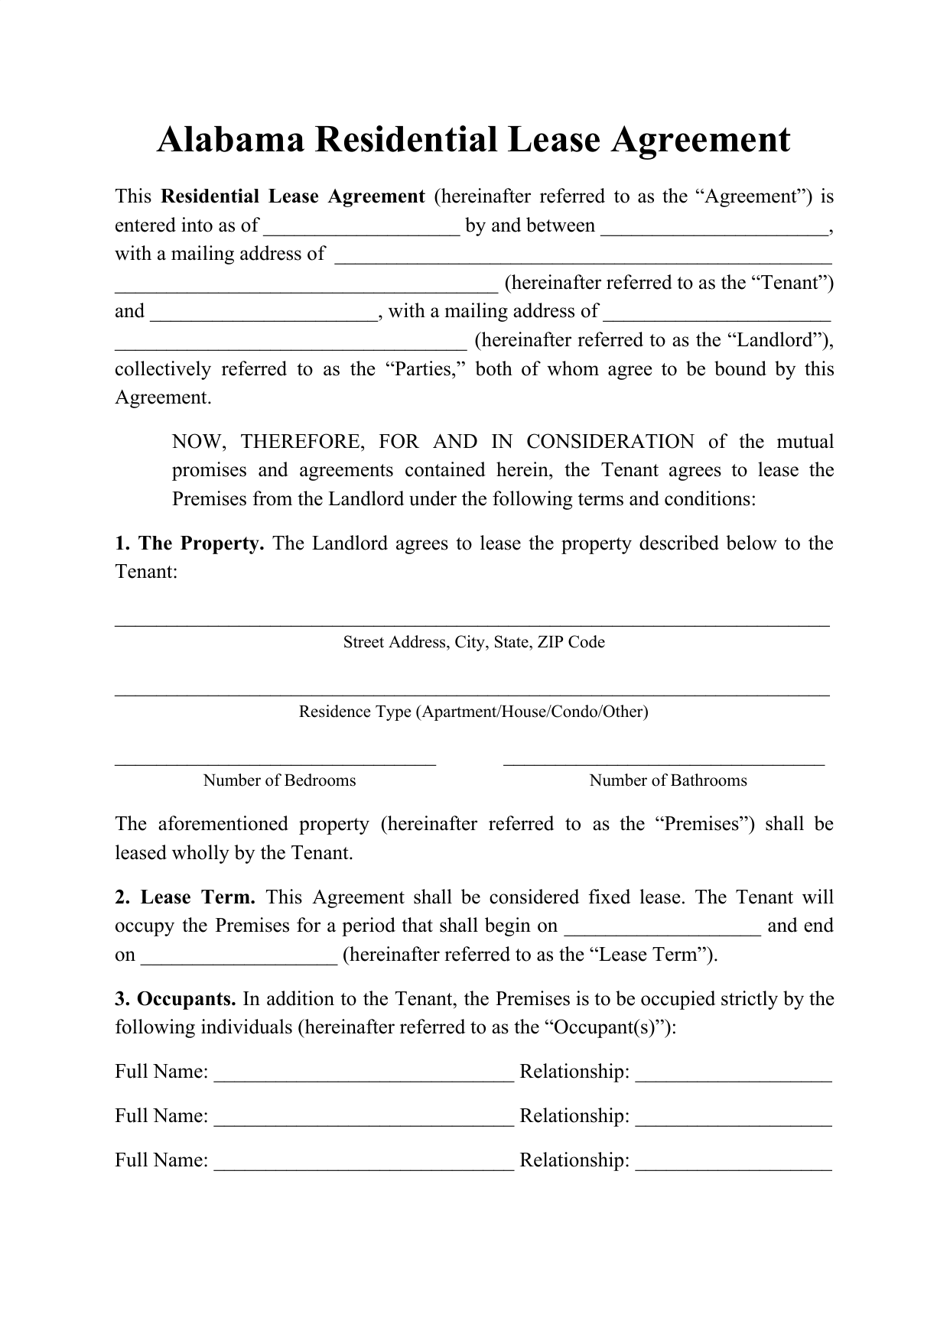 alabama-residential-lease-agreement-template-download-printable-pdf-templateroller